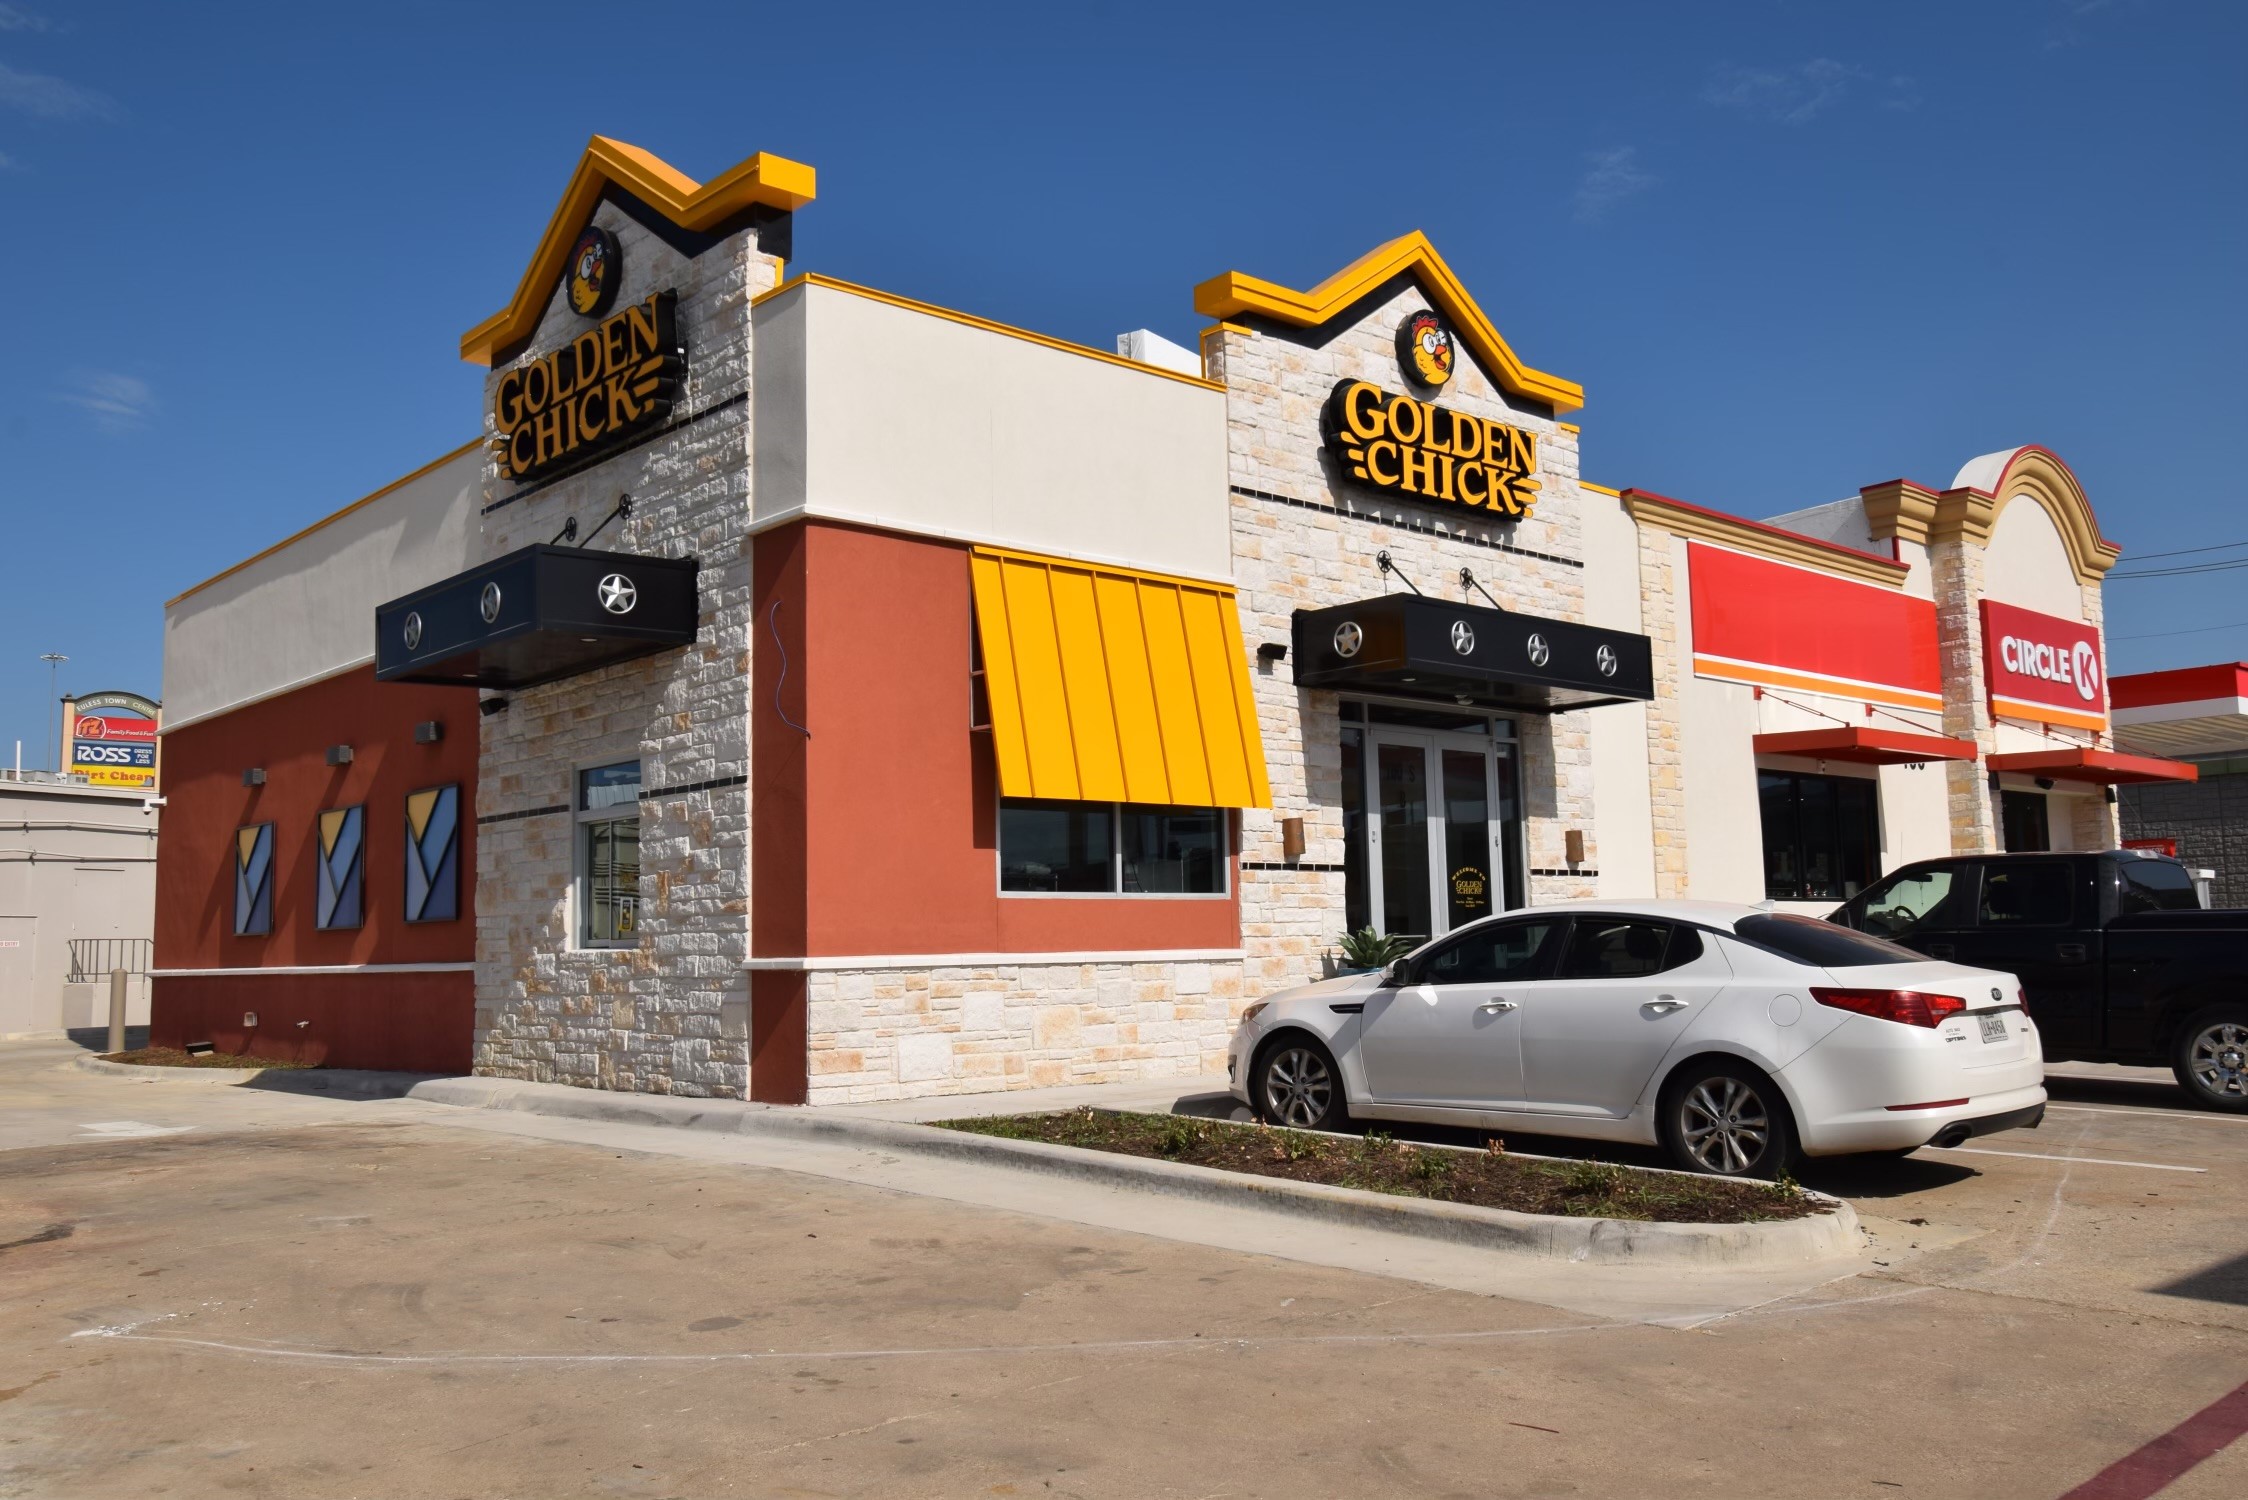 Golden Chick storefront.  Your local Golden Chick fast food restaurant in Euless, Texas